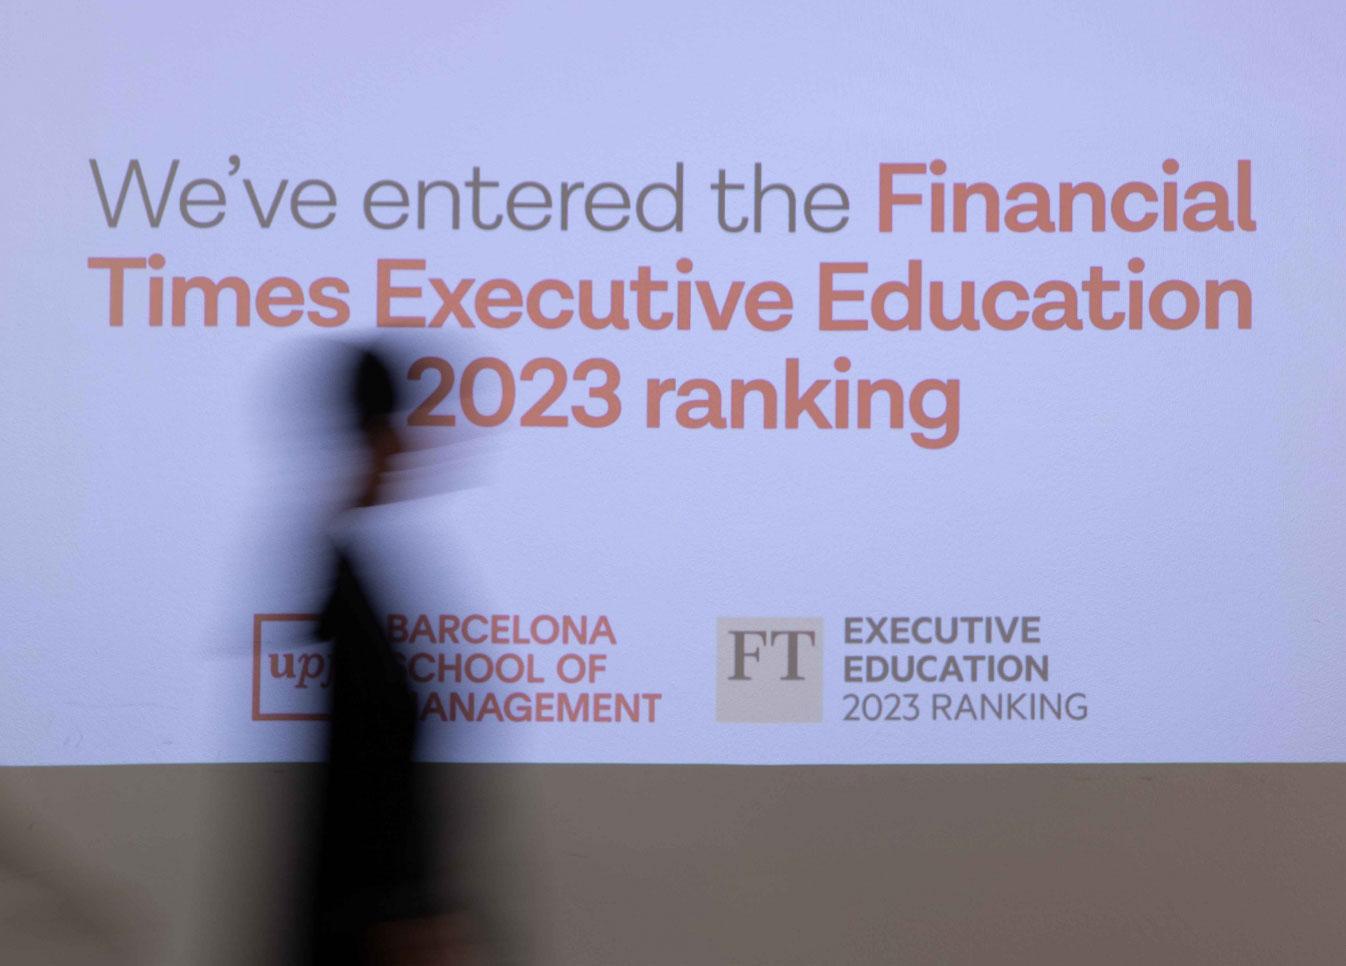 UPF-BSM enters the Financial Times Executive Education ranking